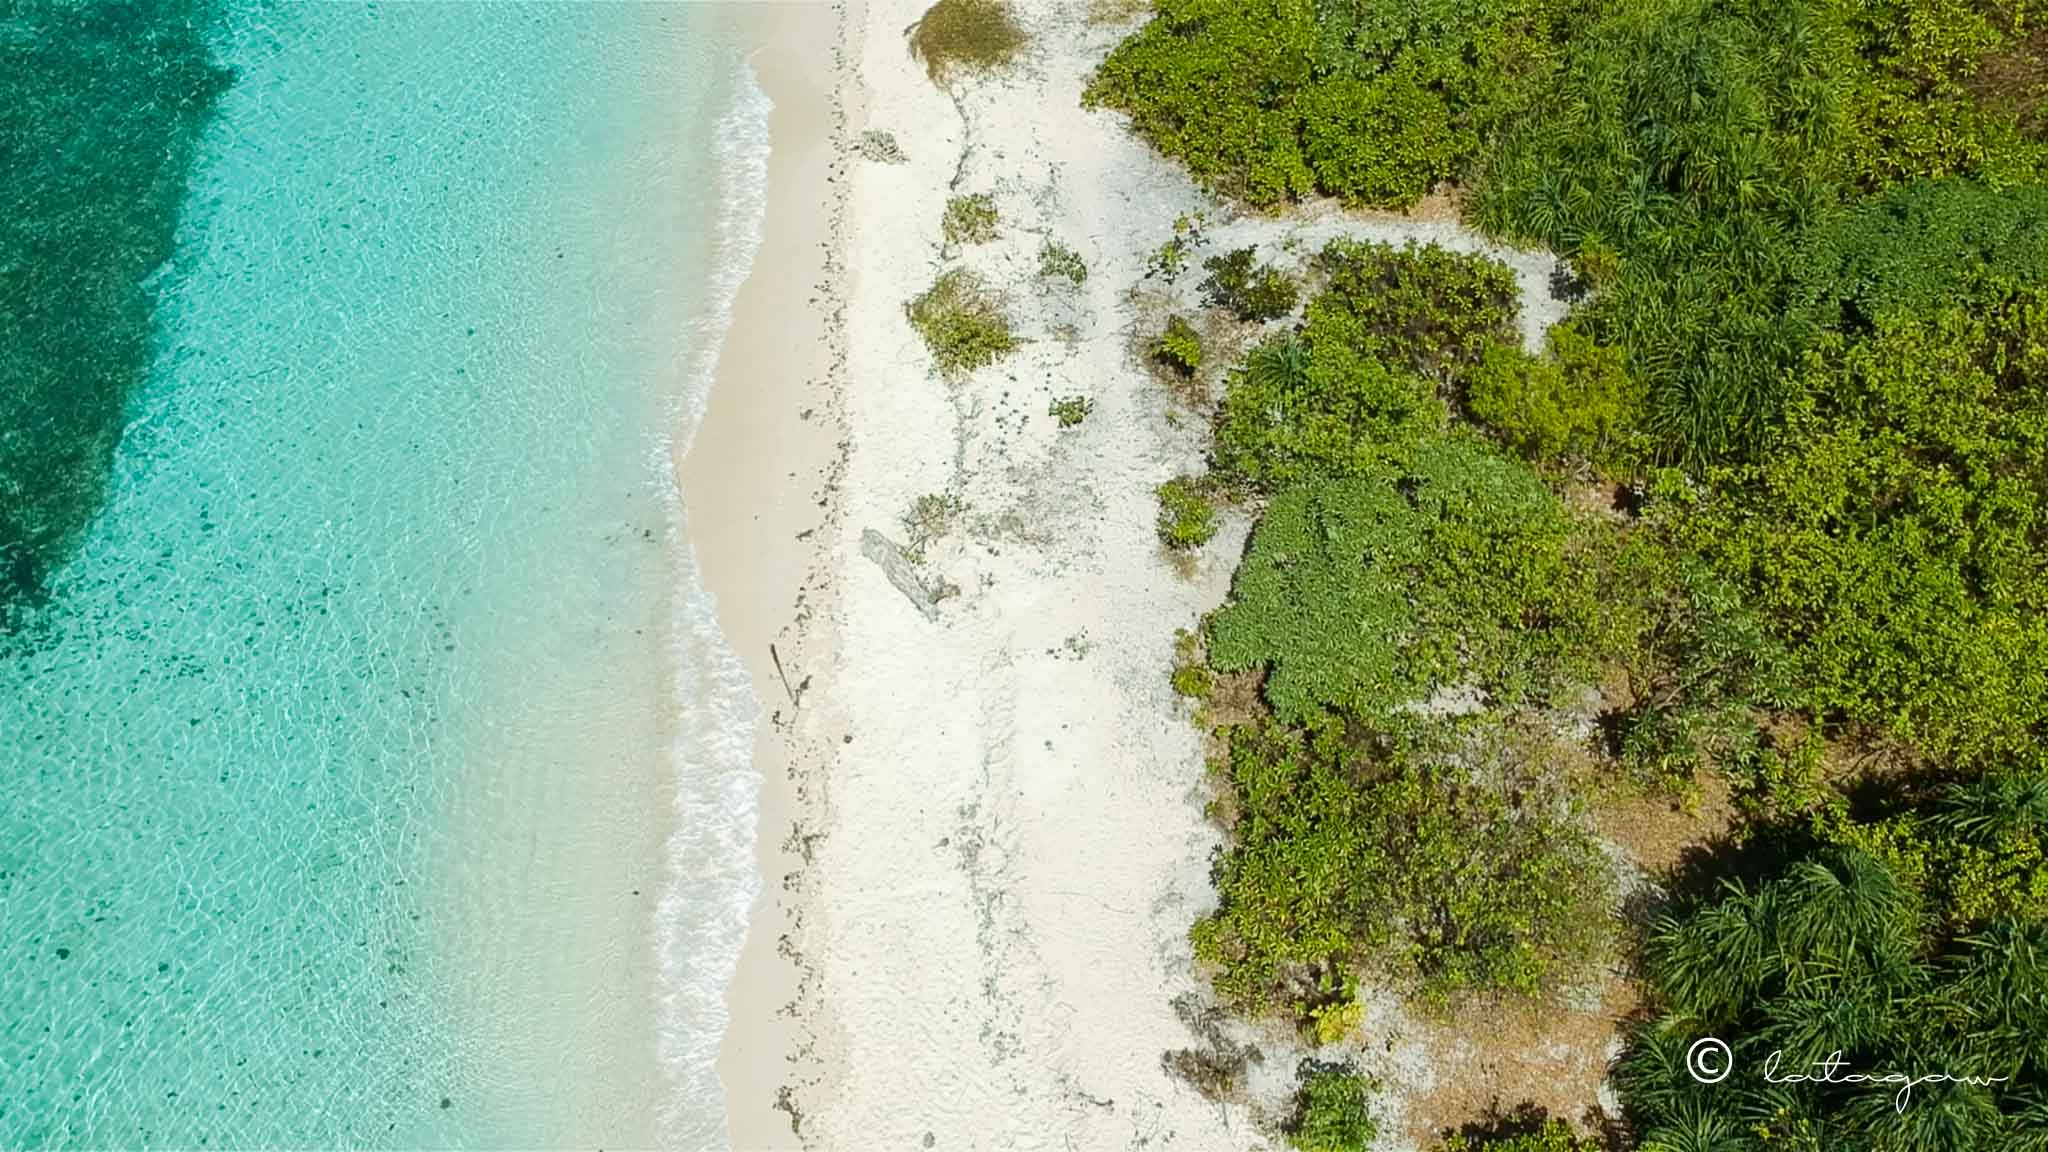 Top view of mantigue island camiguin philippines